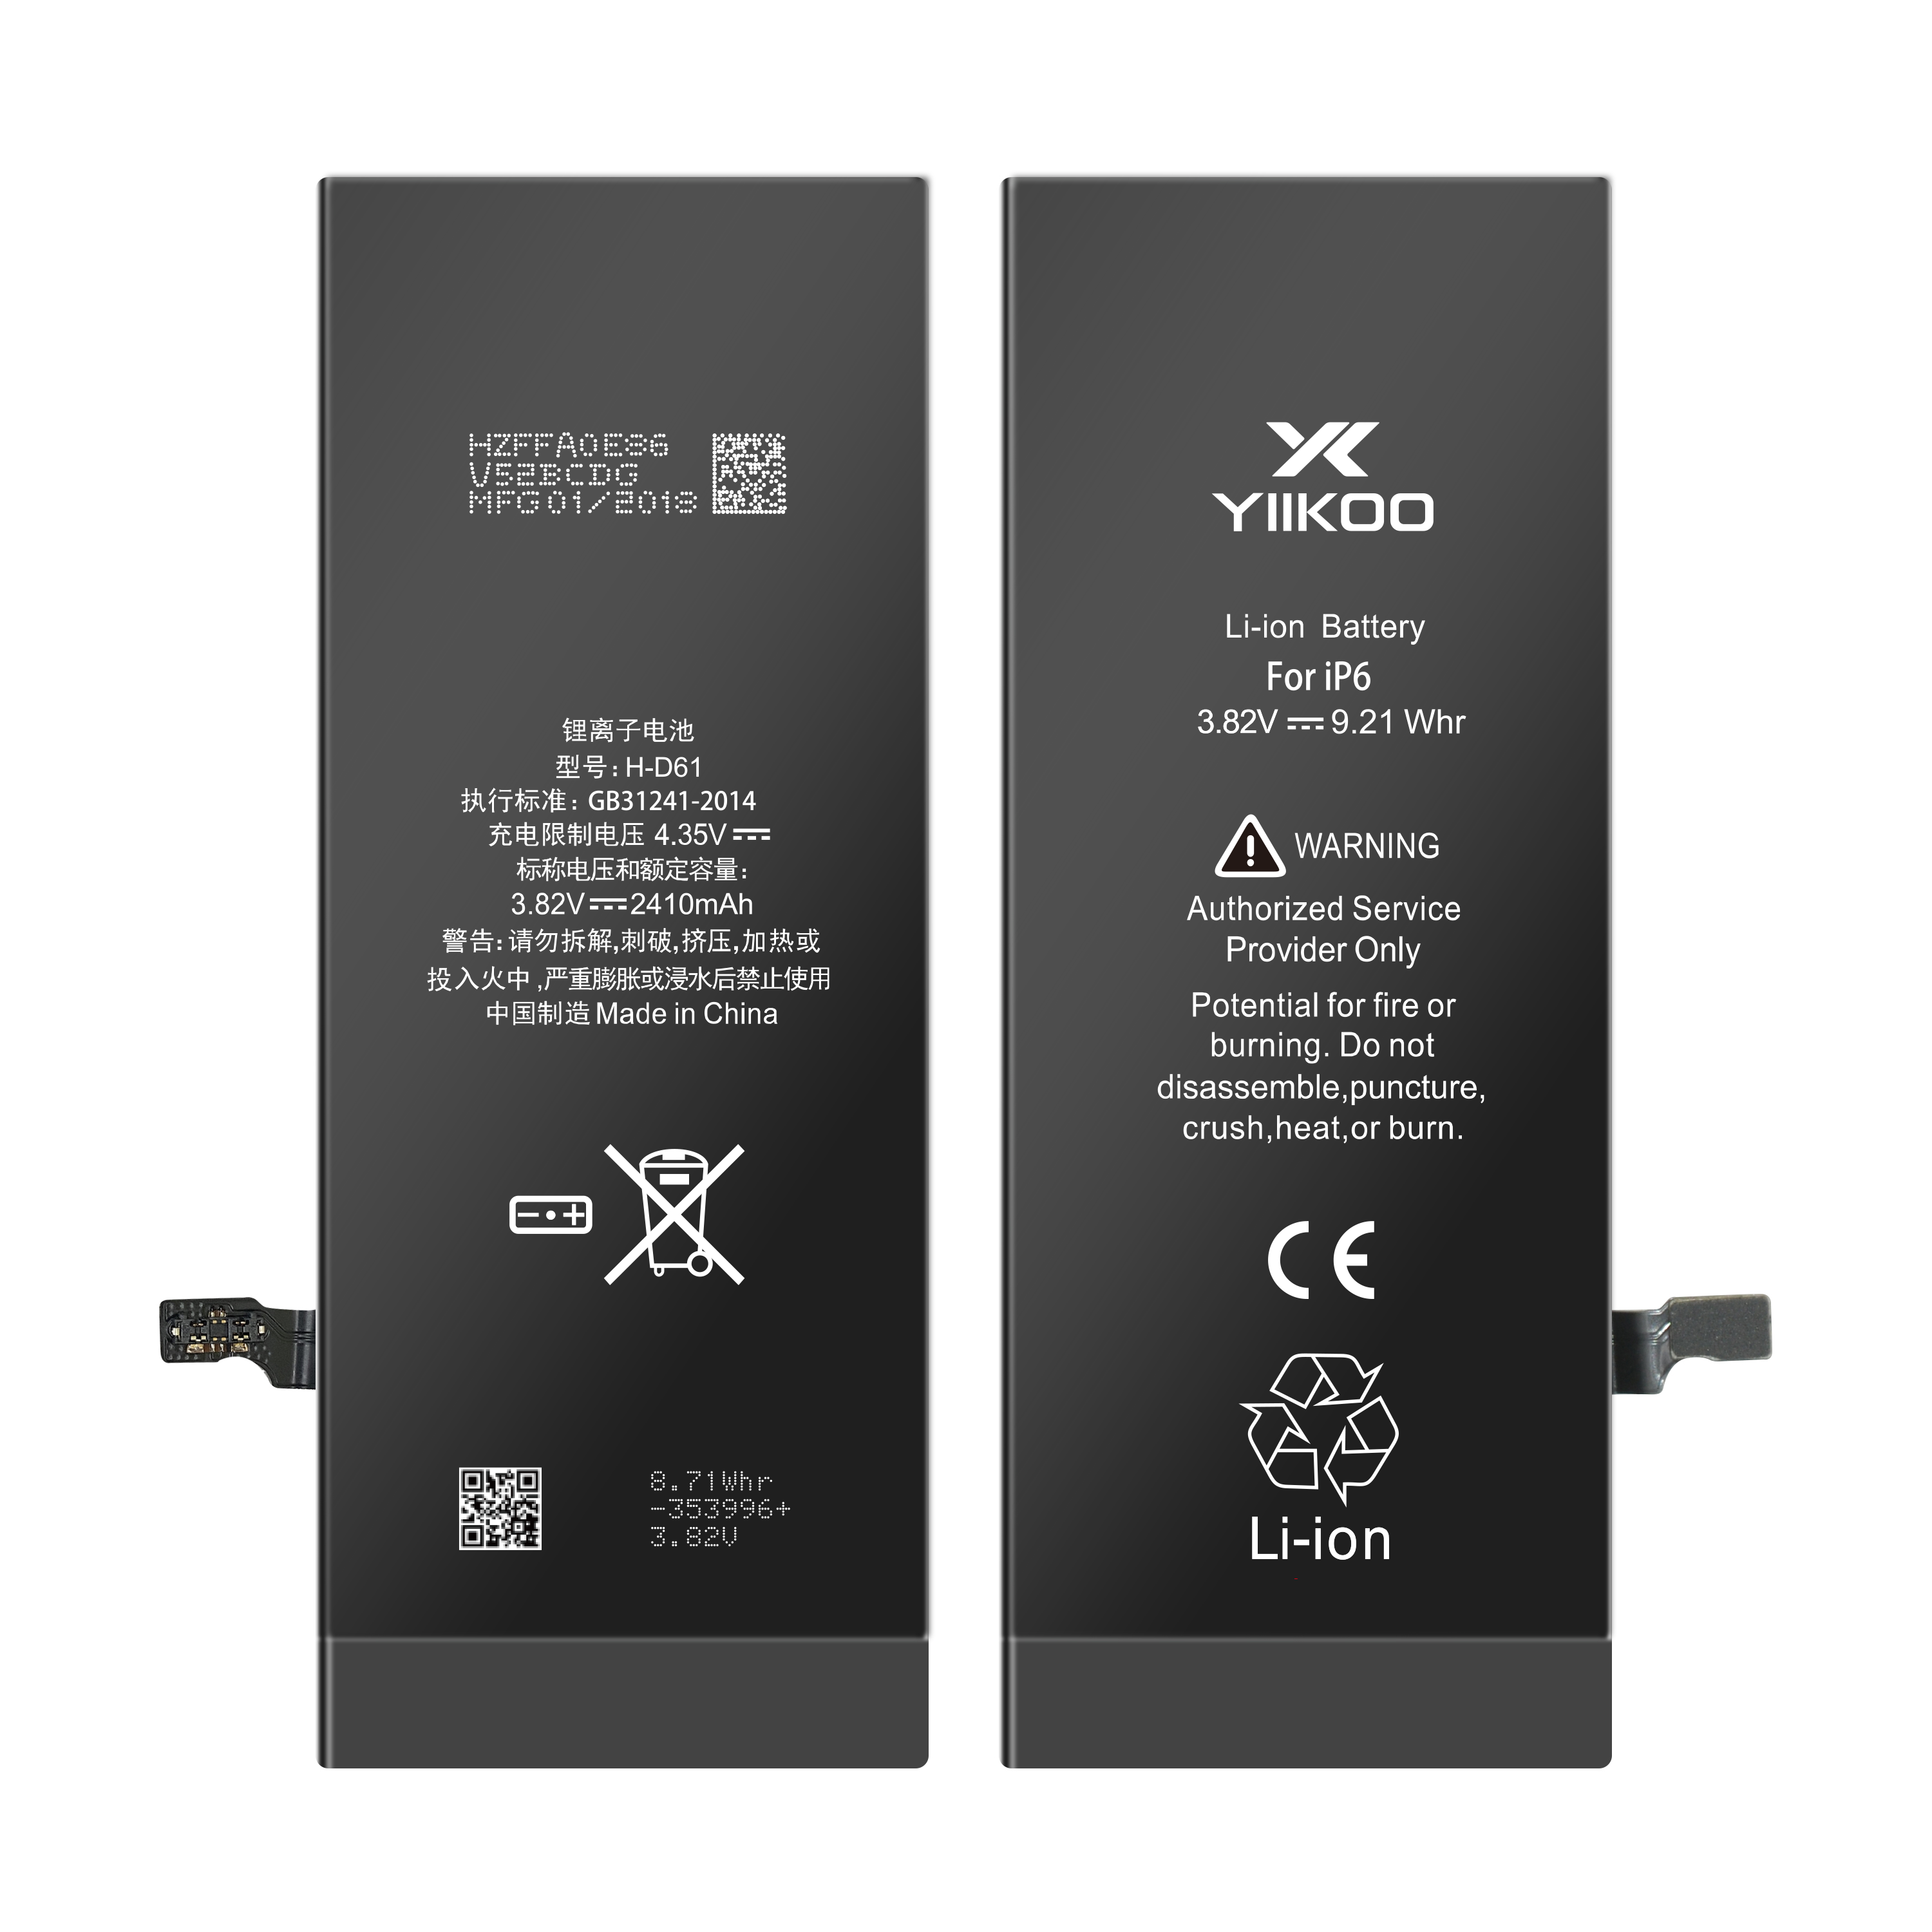 2200mah 3.82V Original Capacity For Change High Capacity Battery For Iphone 6 Featured Image